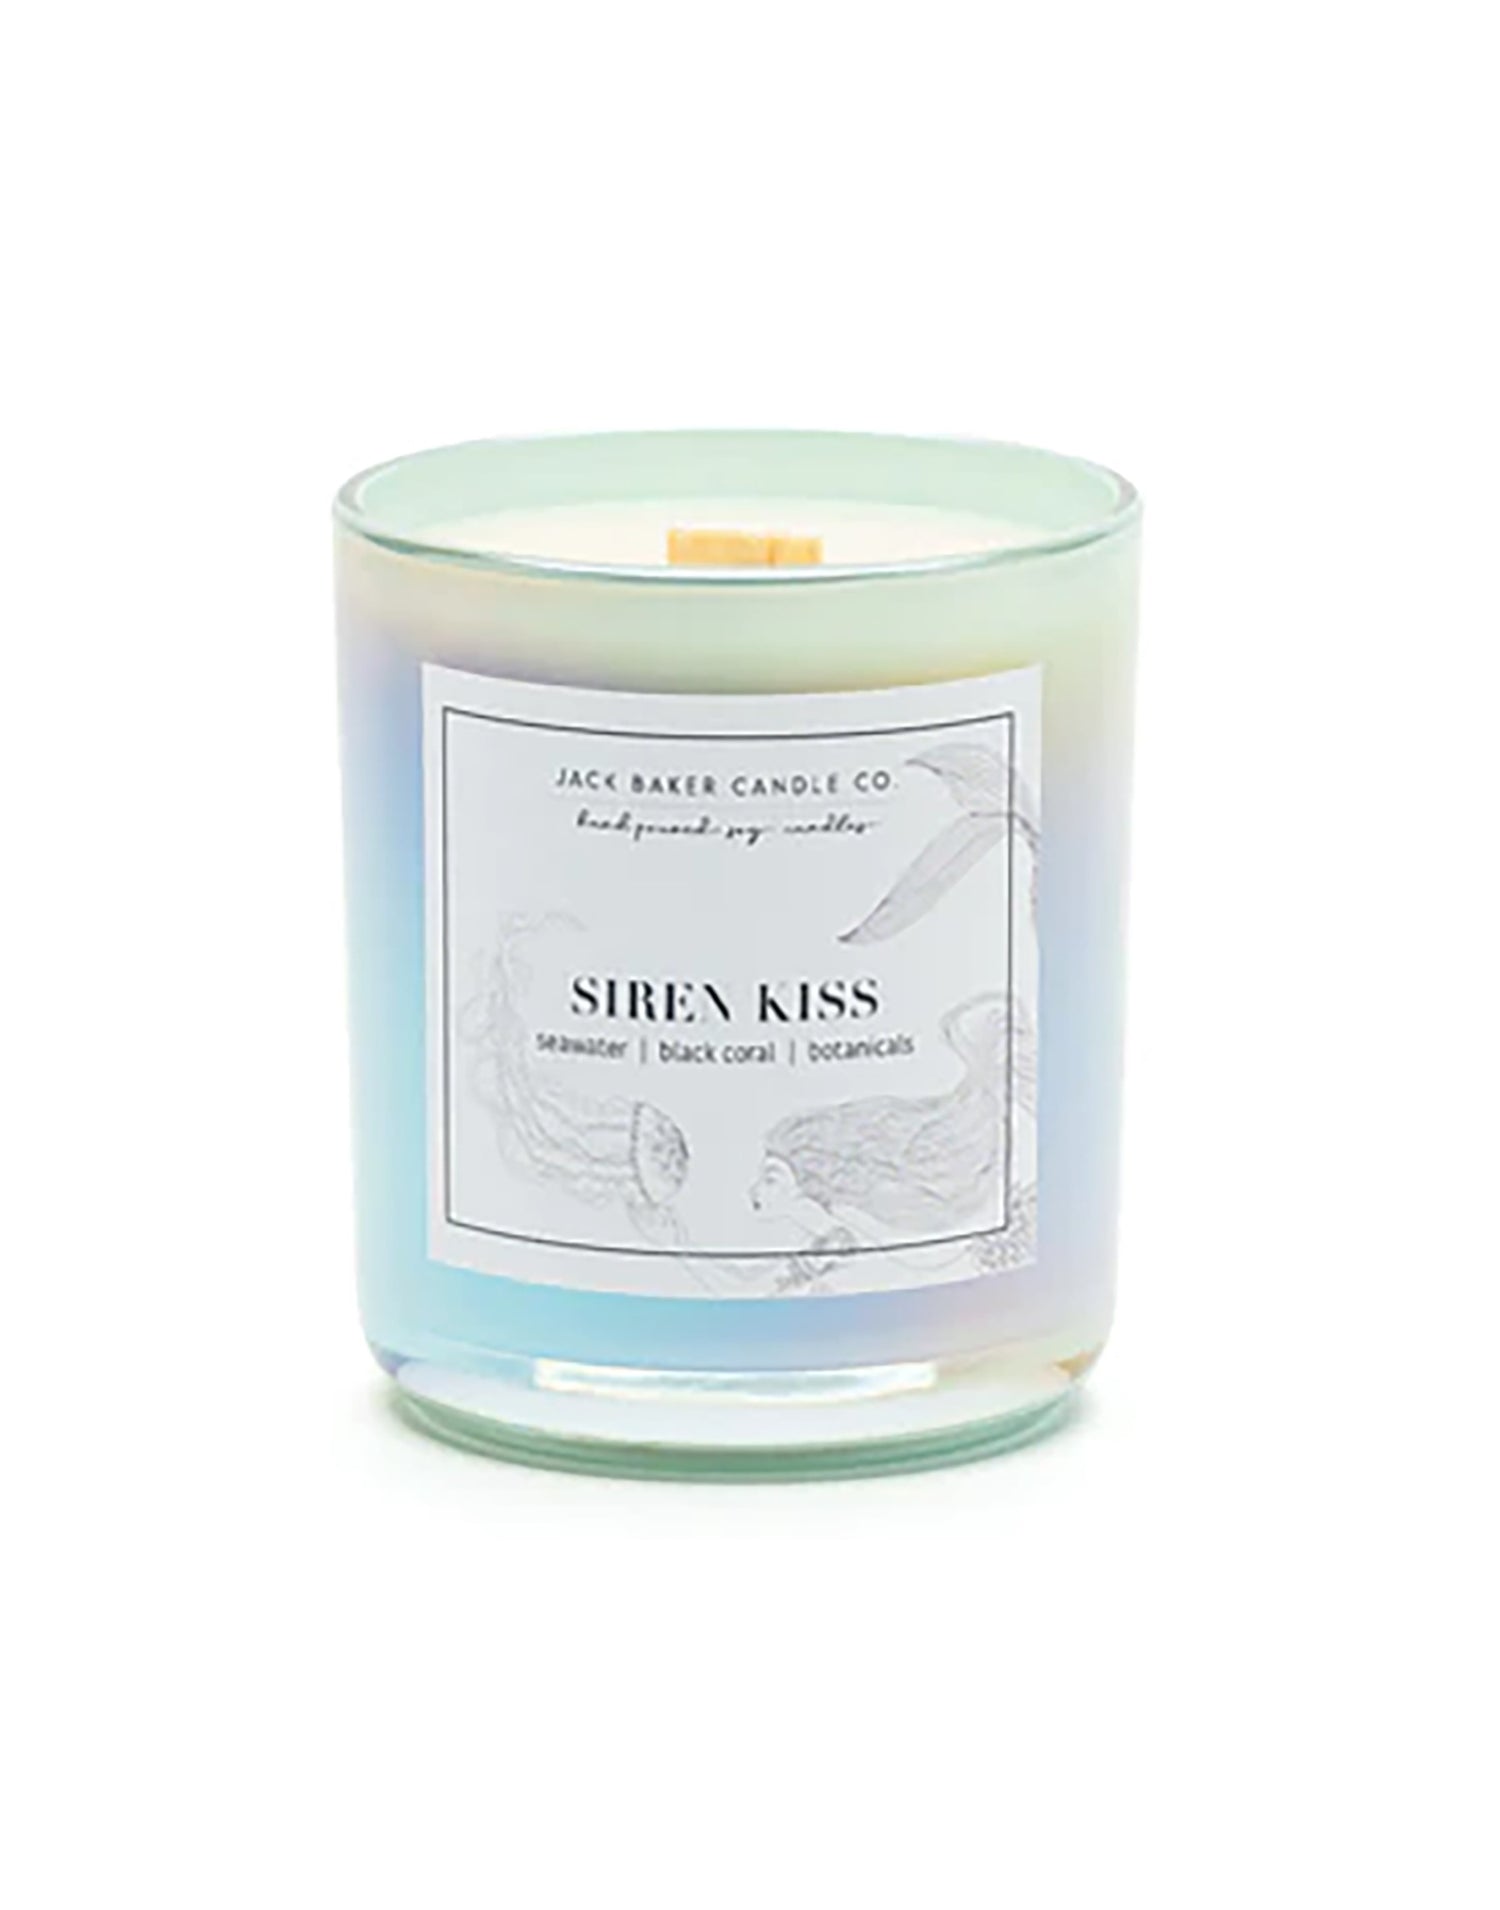 Siren Kiss Candle by Jack Baker Candle Co. - Product View